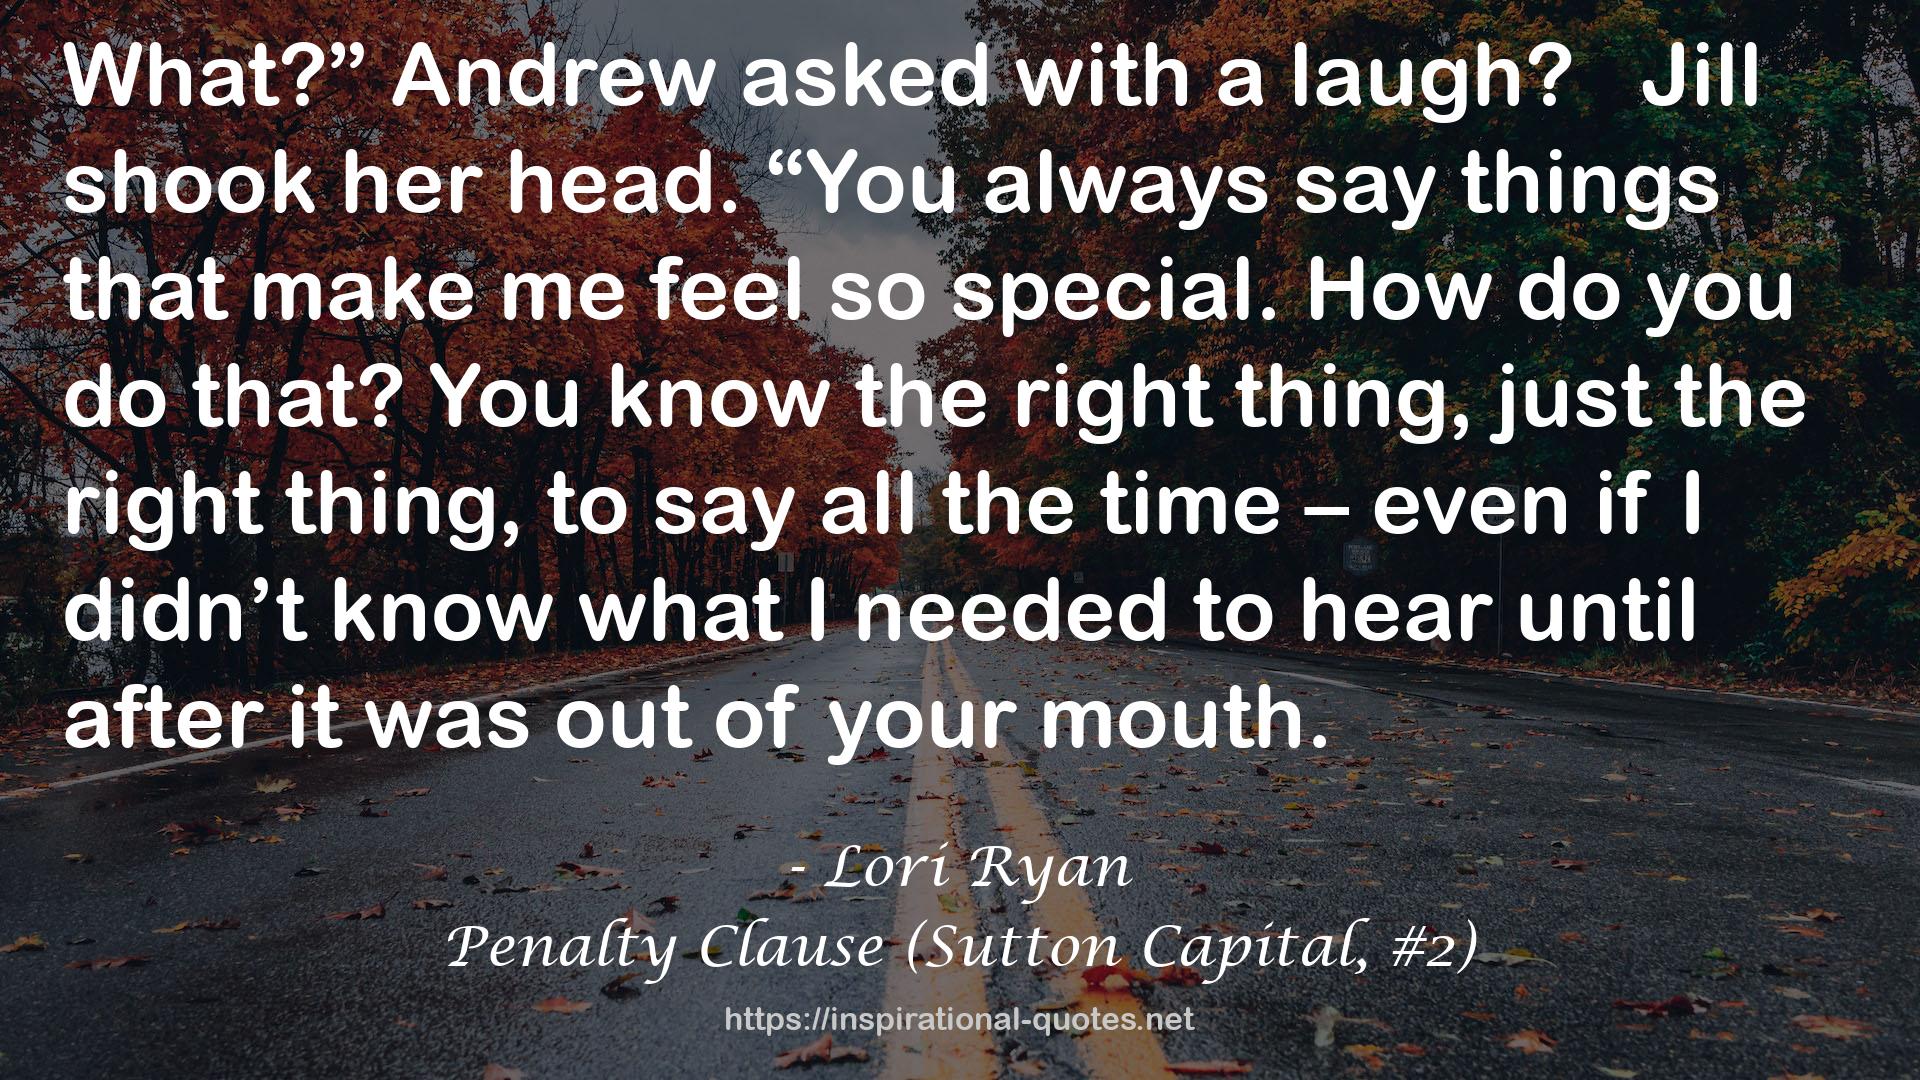 Penalty Clause (Sutton Capital, #2) QUOTES